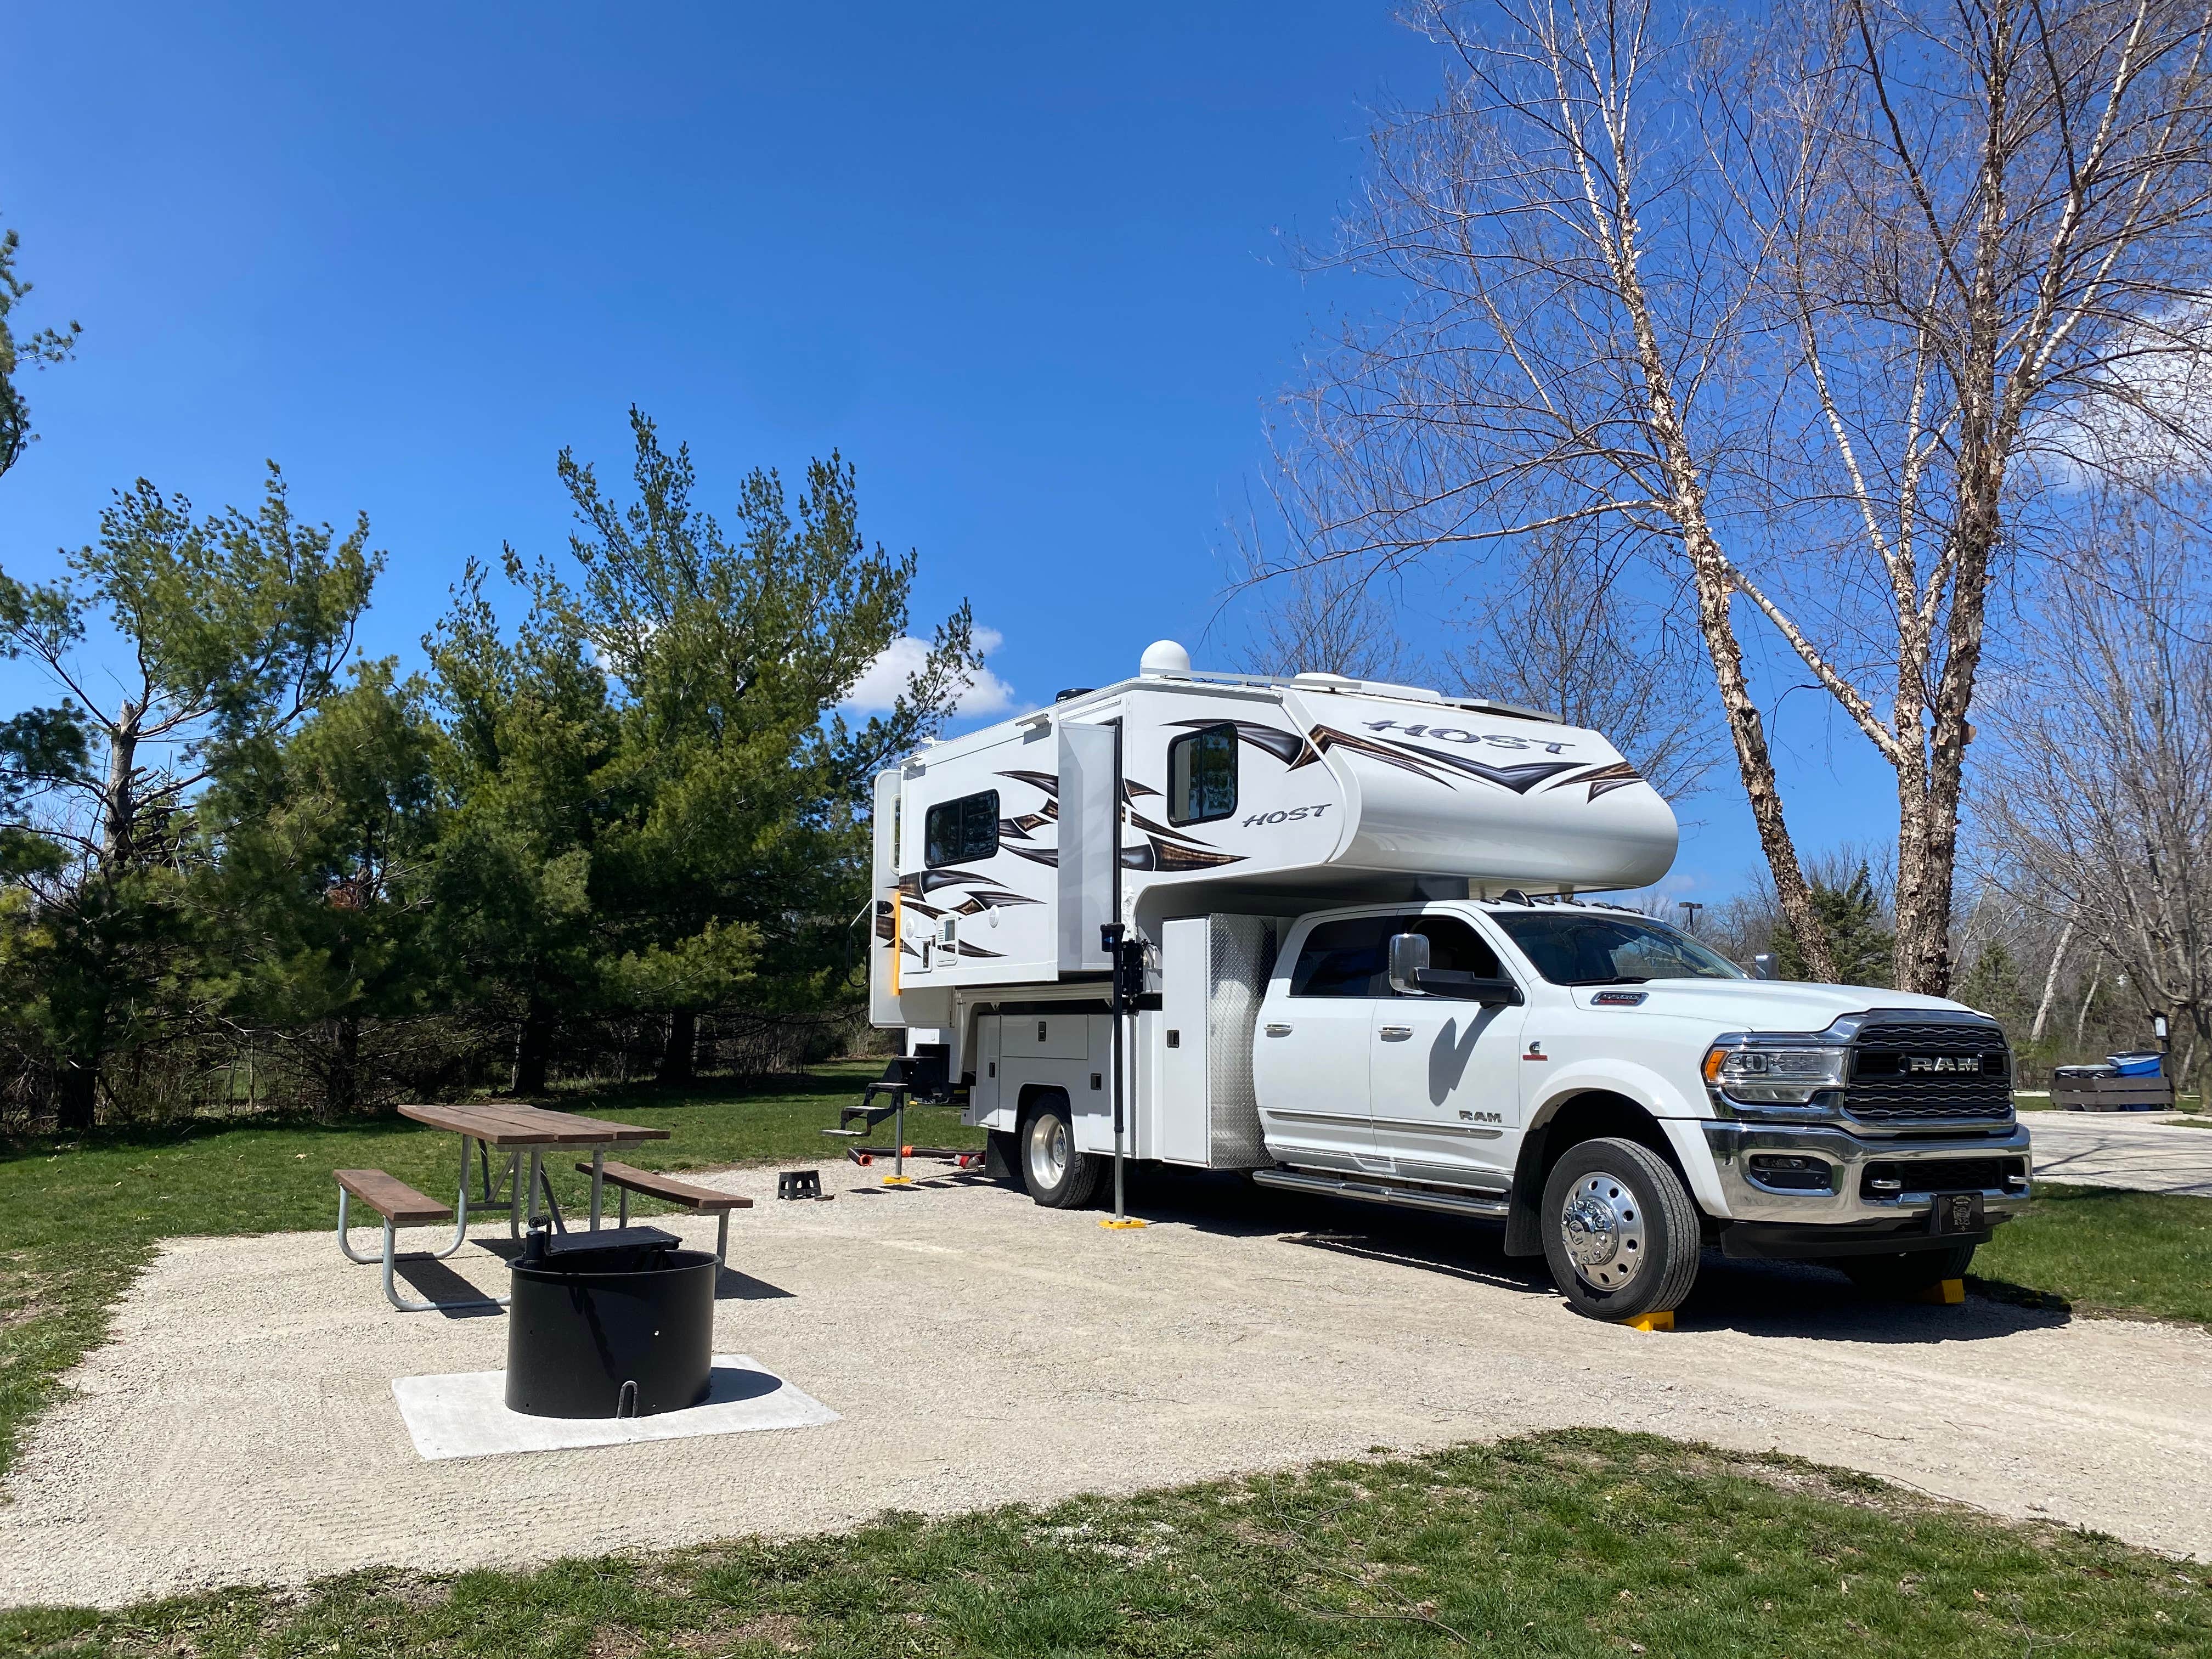 Camper submitted image from Linn County Park Morgan Creek Campground - 1